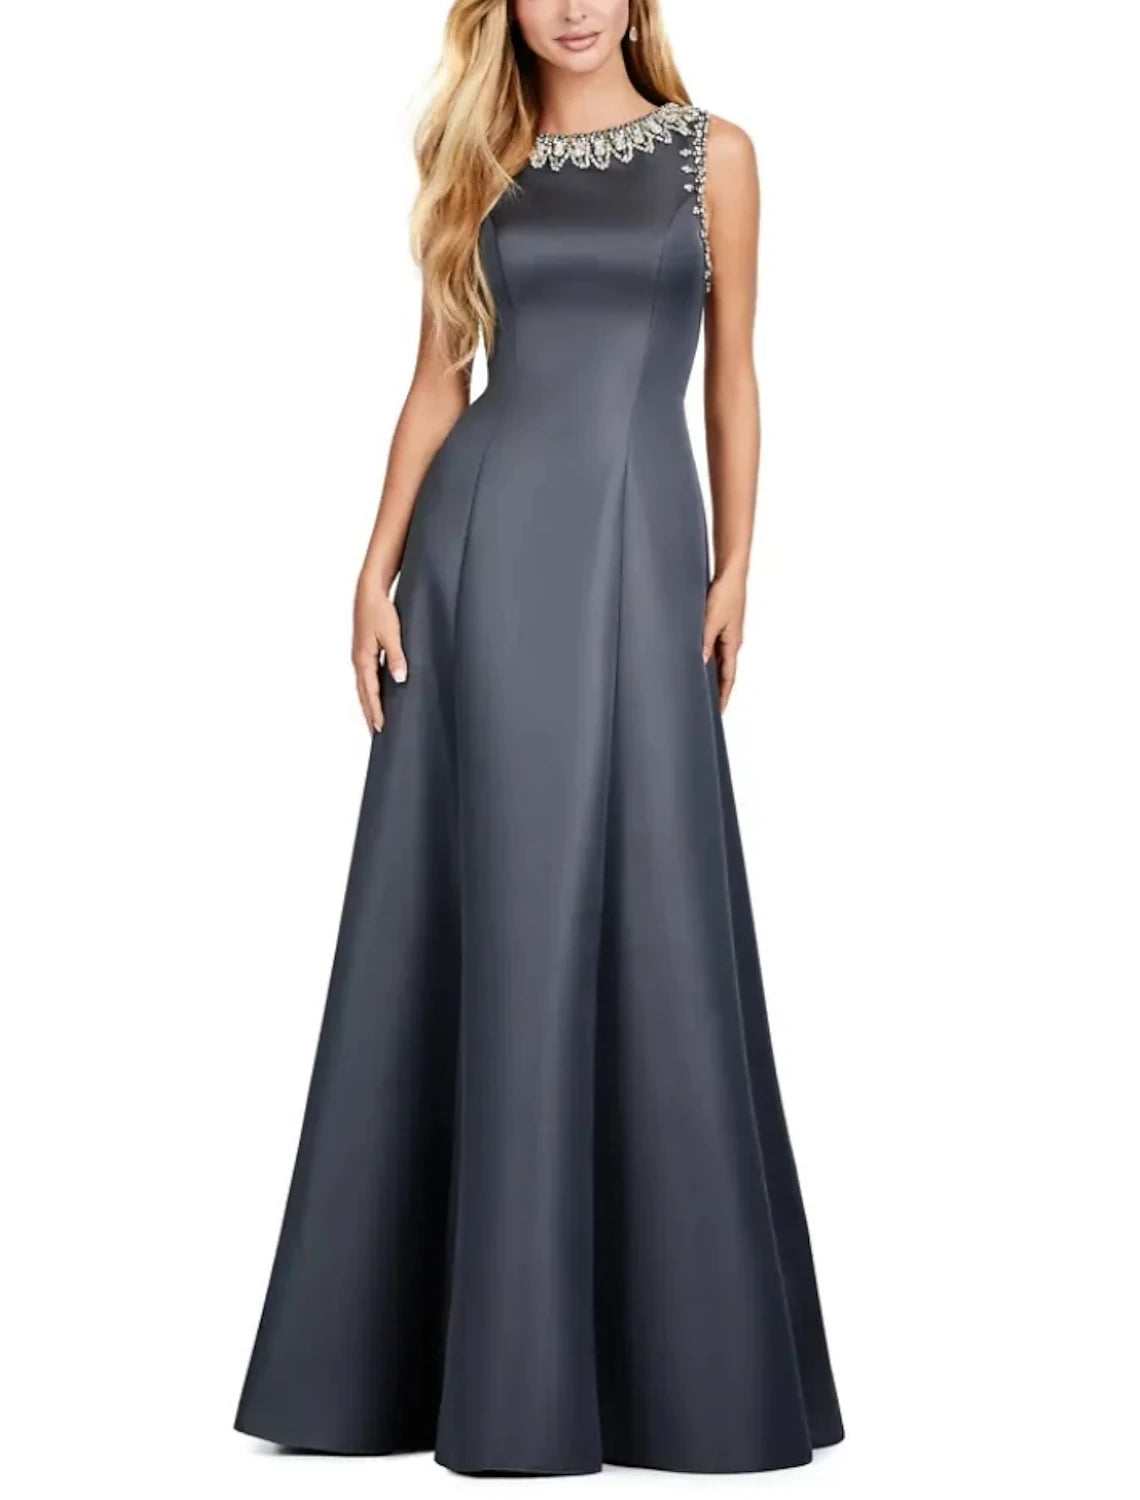 Two Piece A-Line Mother of the Bride Dress Wedding Guest Elegant Scoop Neck Floor Length Satin Sleeveless with Crystals Ruching